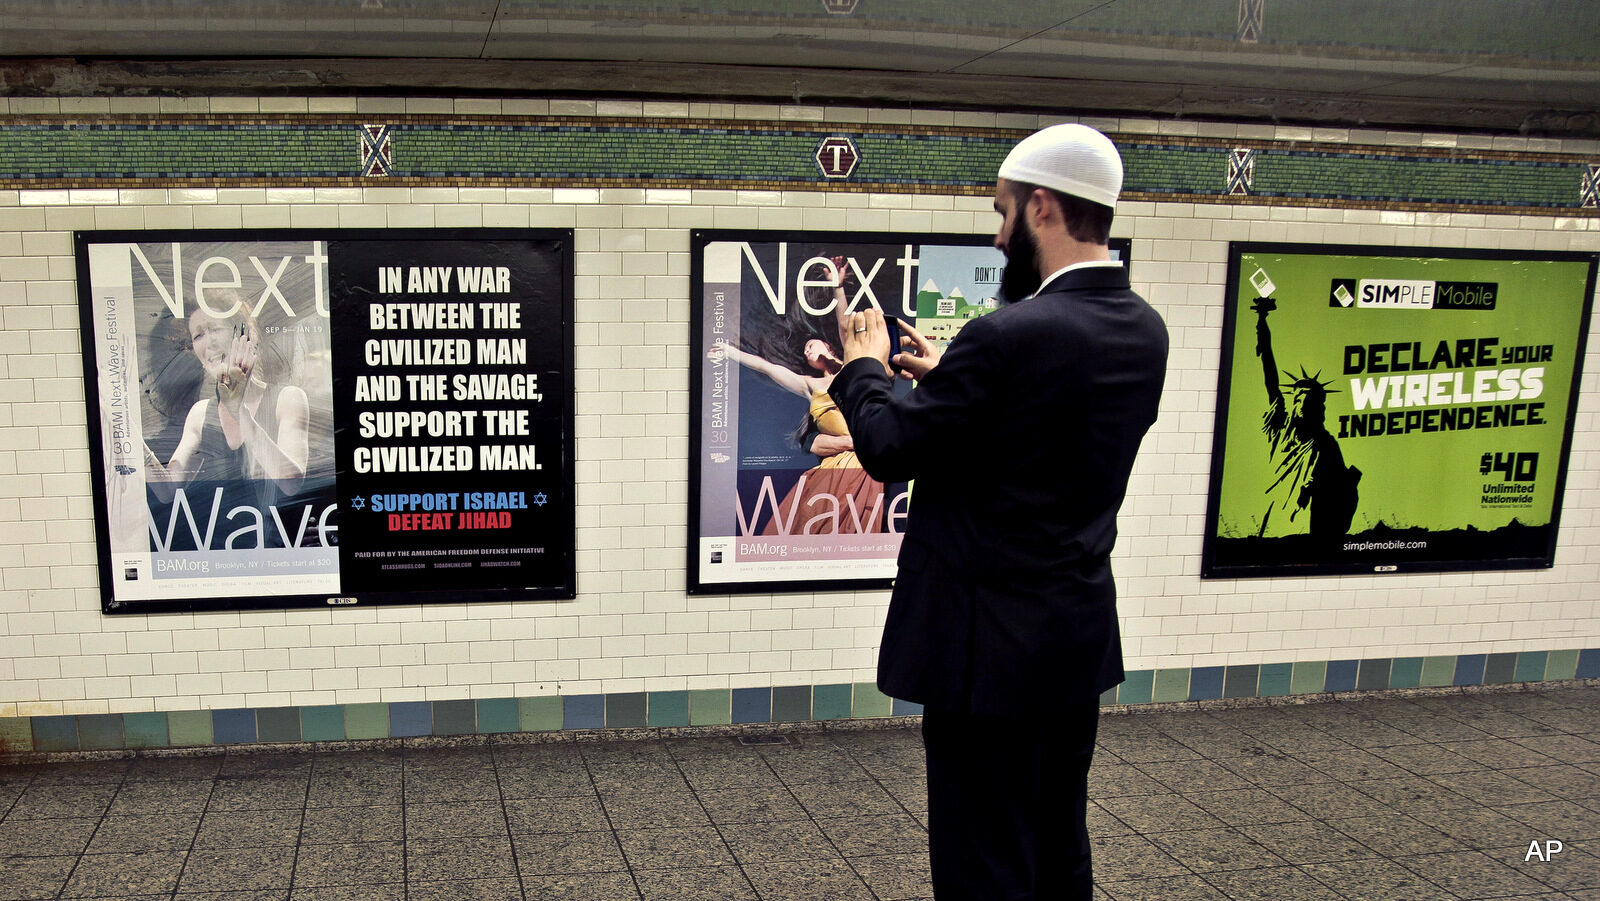 Cyrus McGoldrick, takes a photo with his cell phone of an anti-Muslim poster in New York's Times Square subway station.